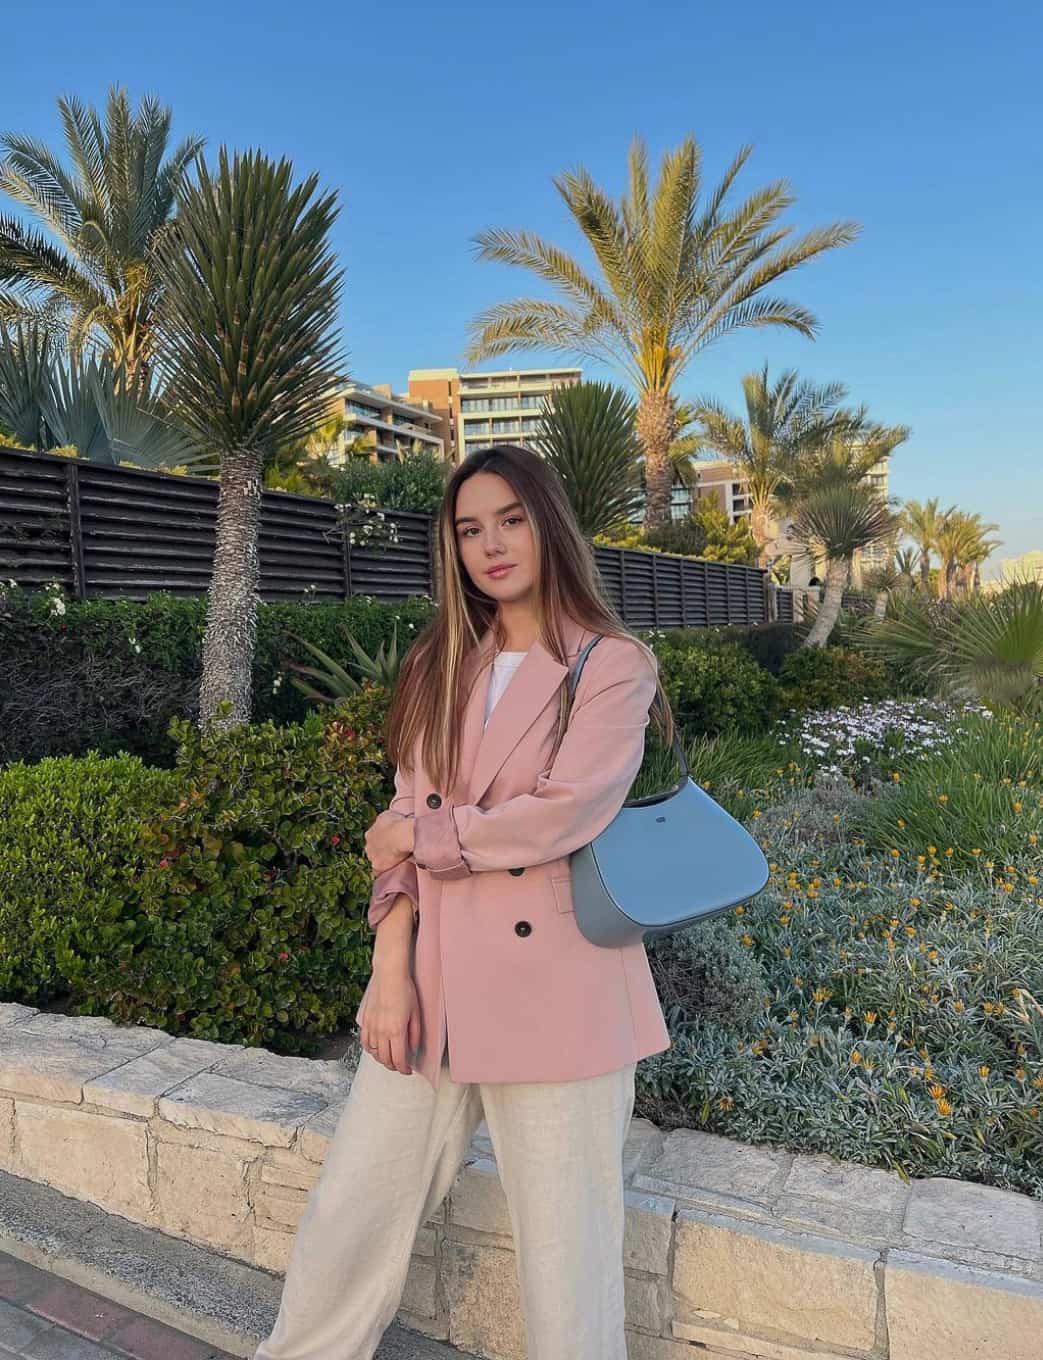 An image of a woman with a blue DKNY purse paired with beige trousers and a pink blazer